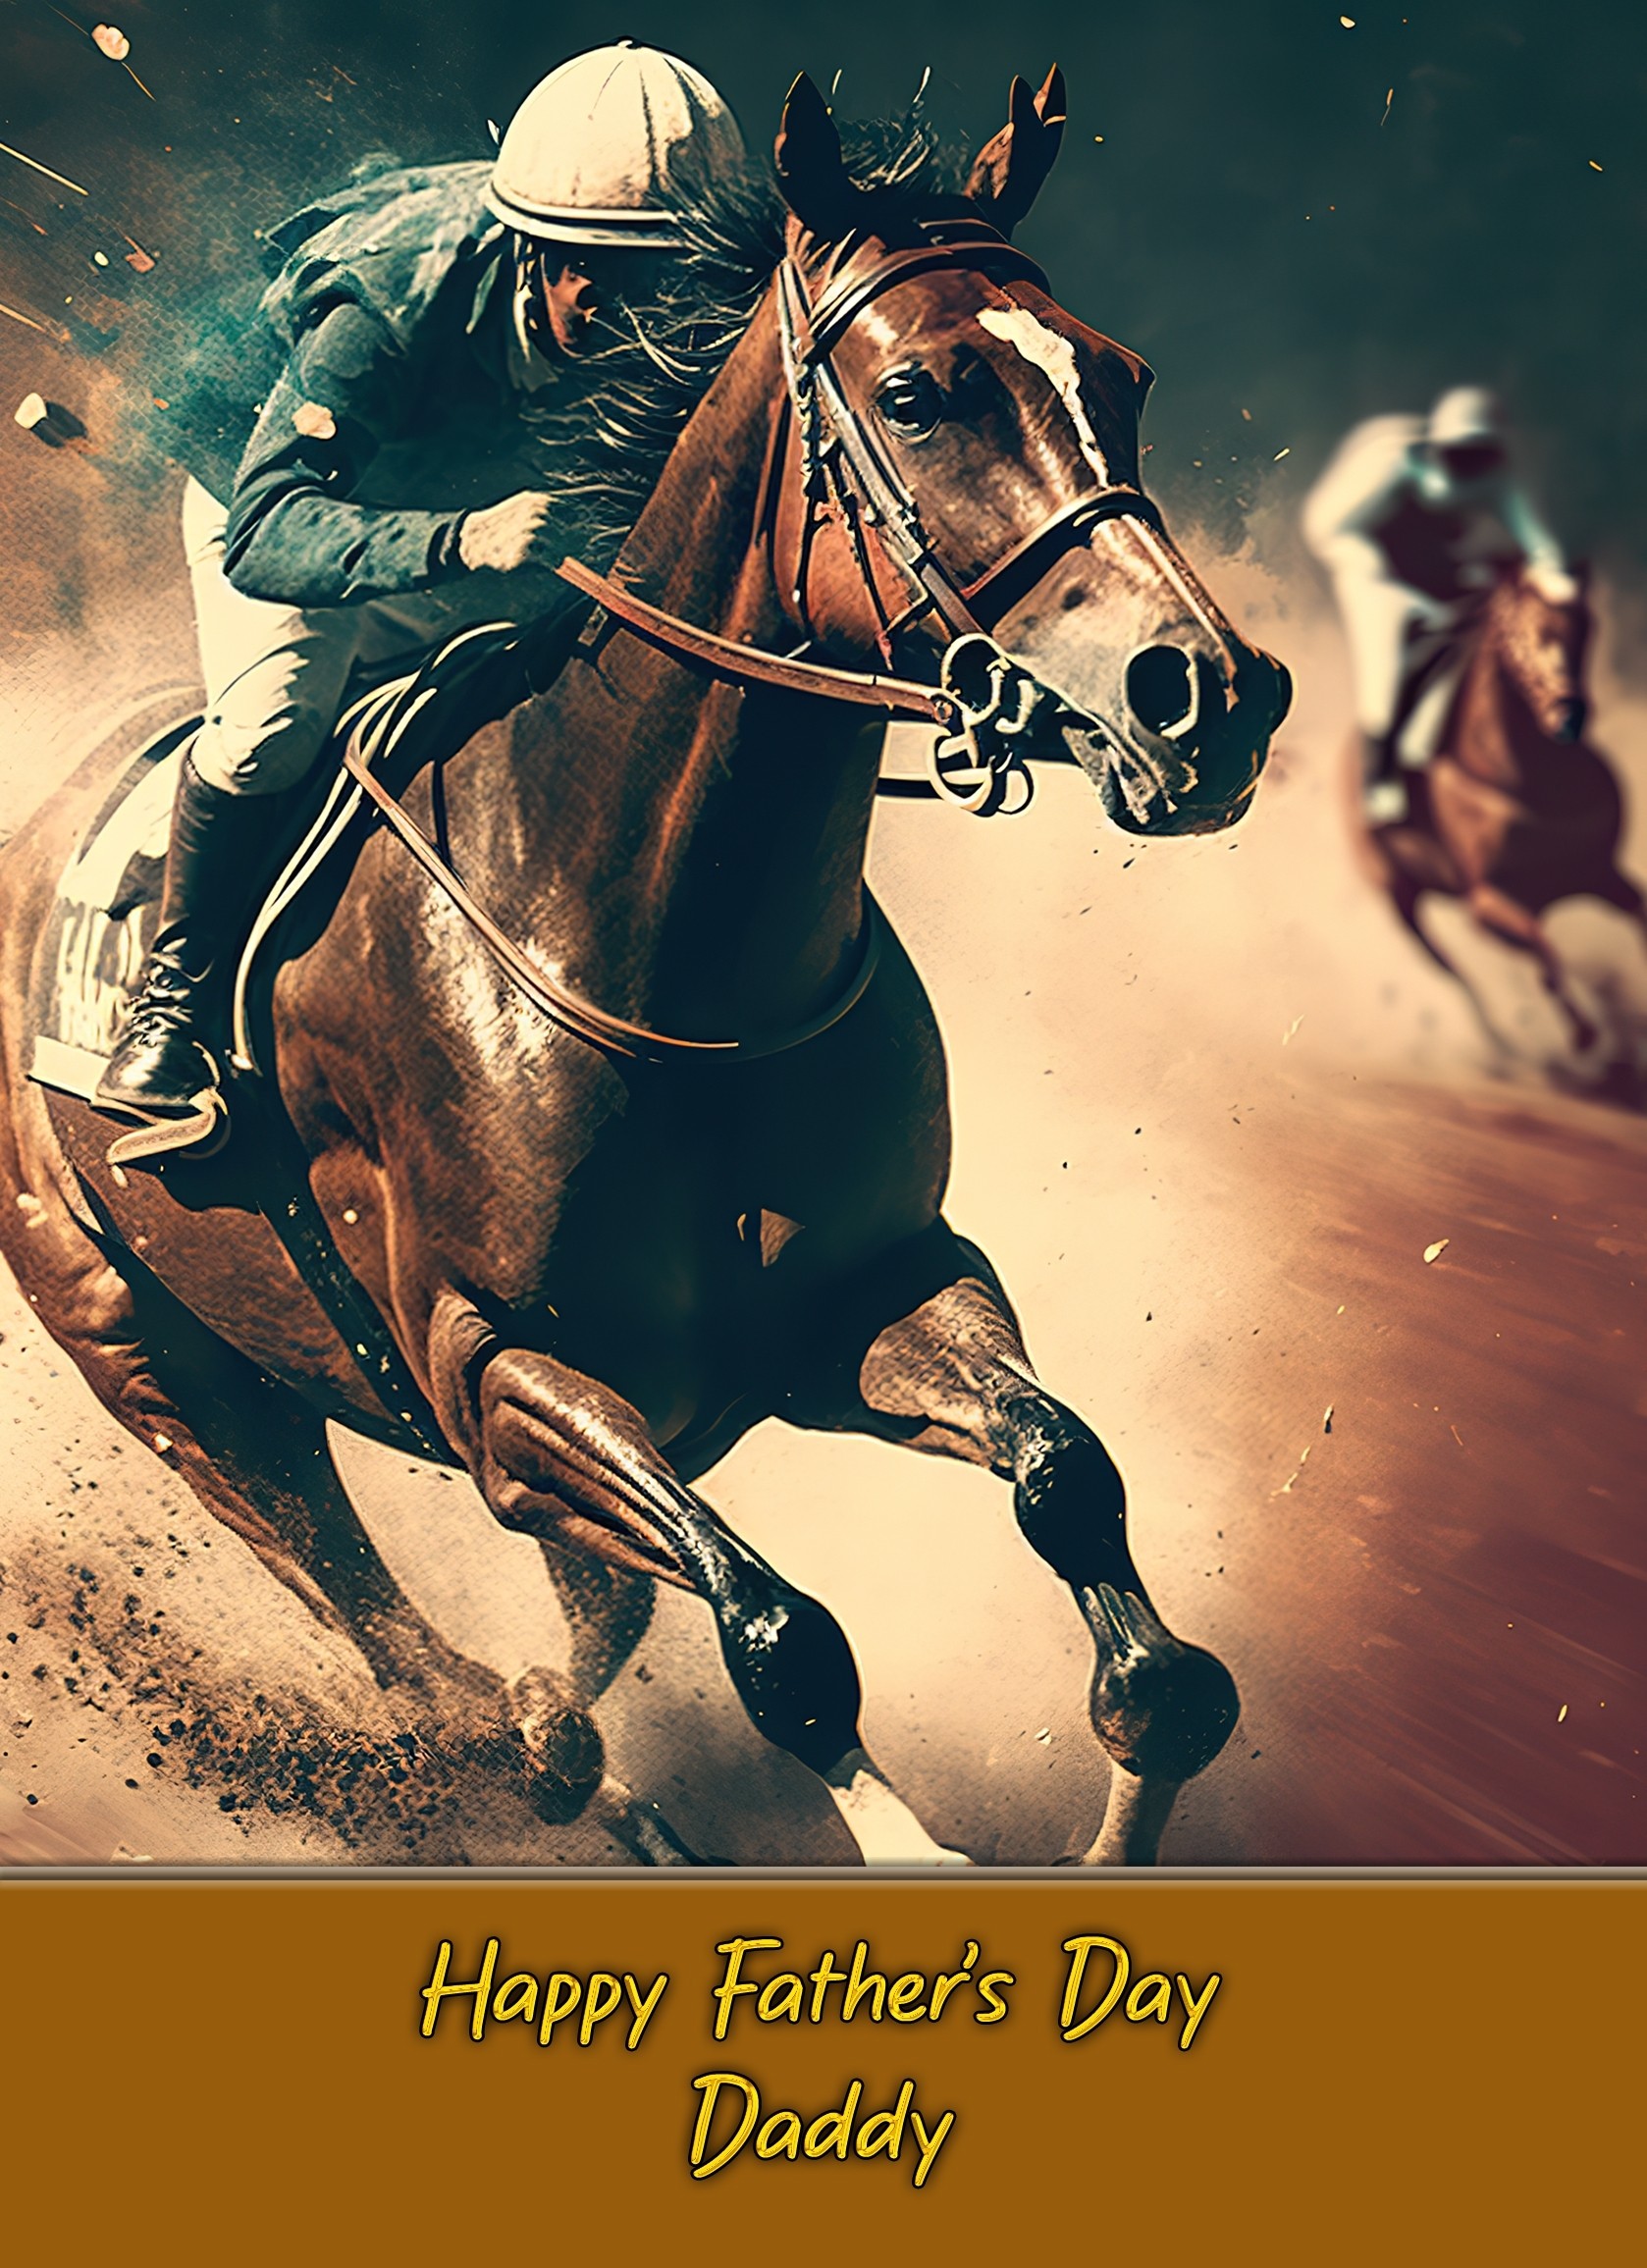 Horse Racing Fathers Day Card for Daddy